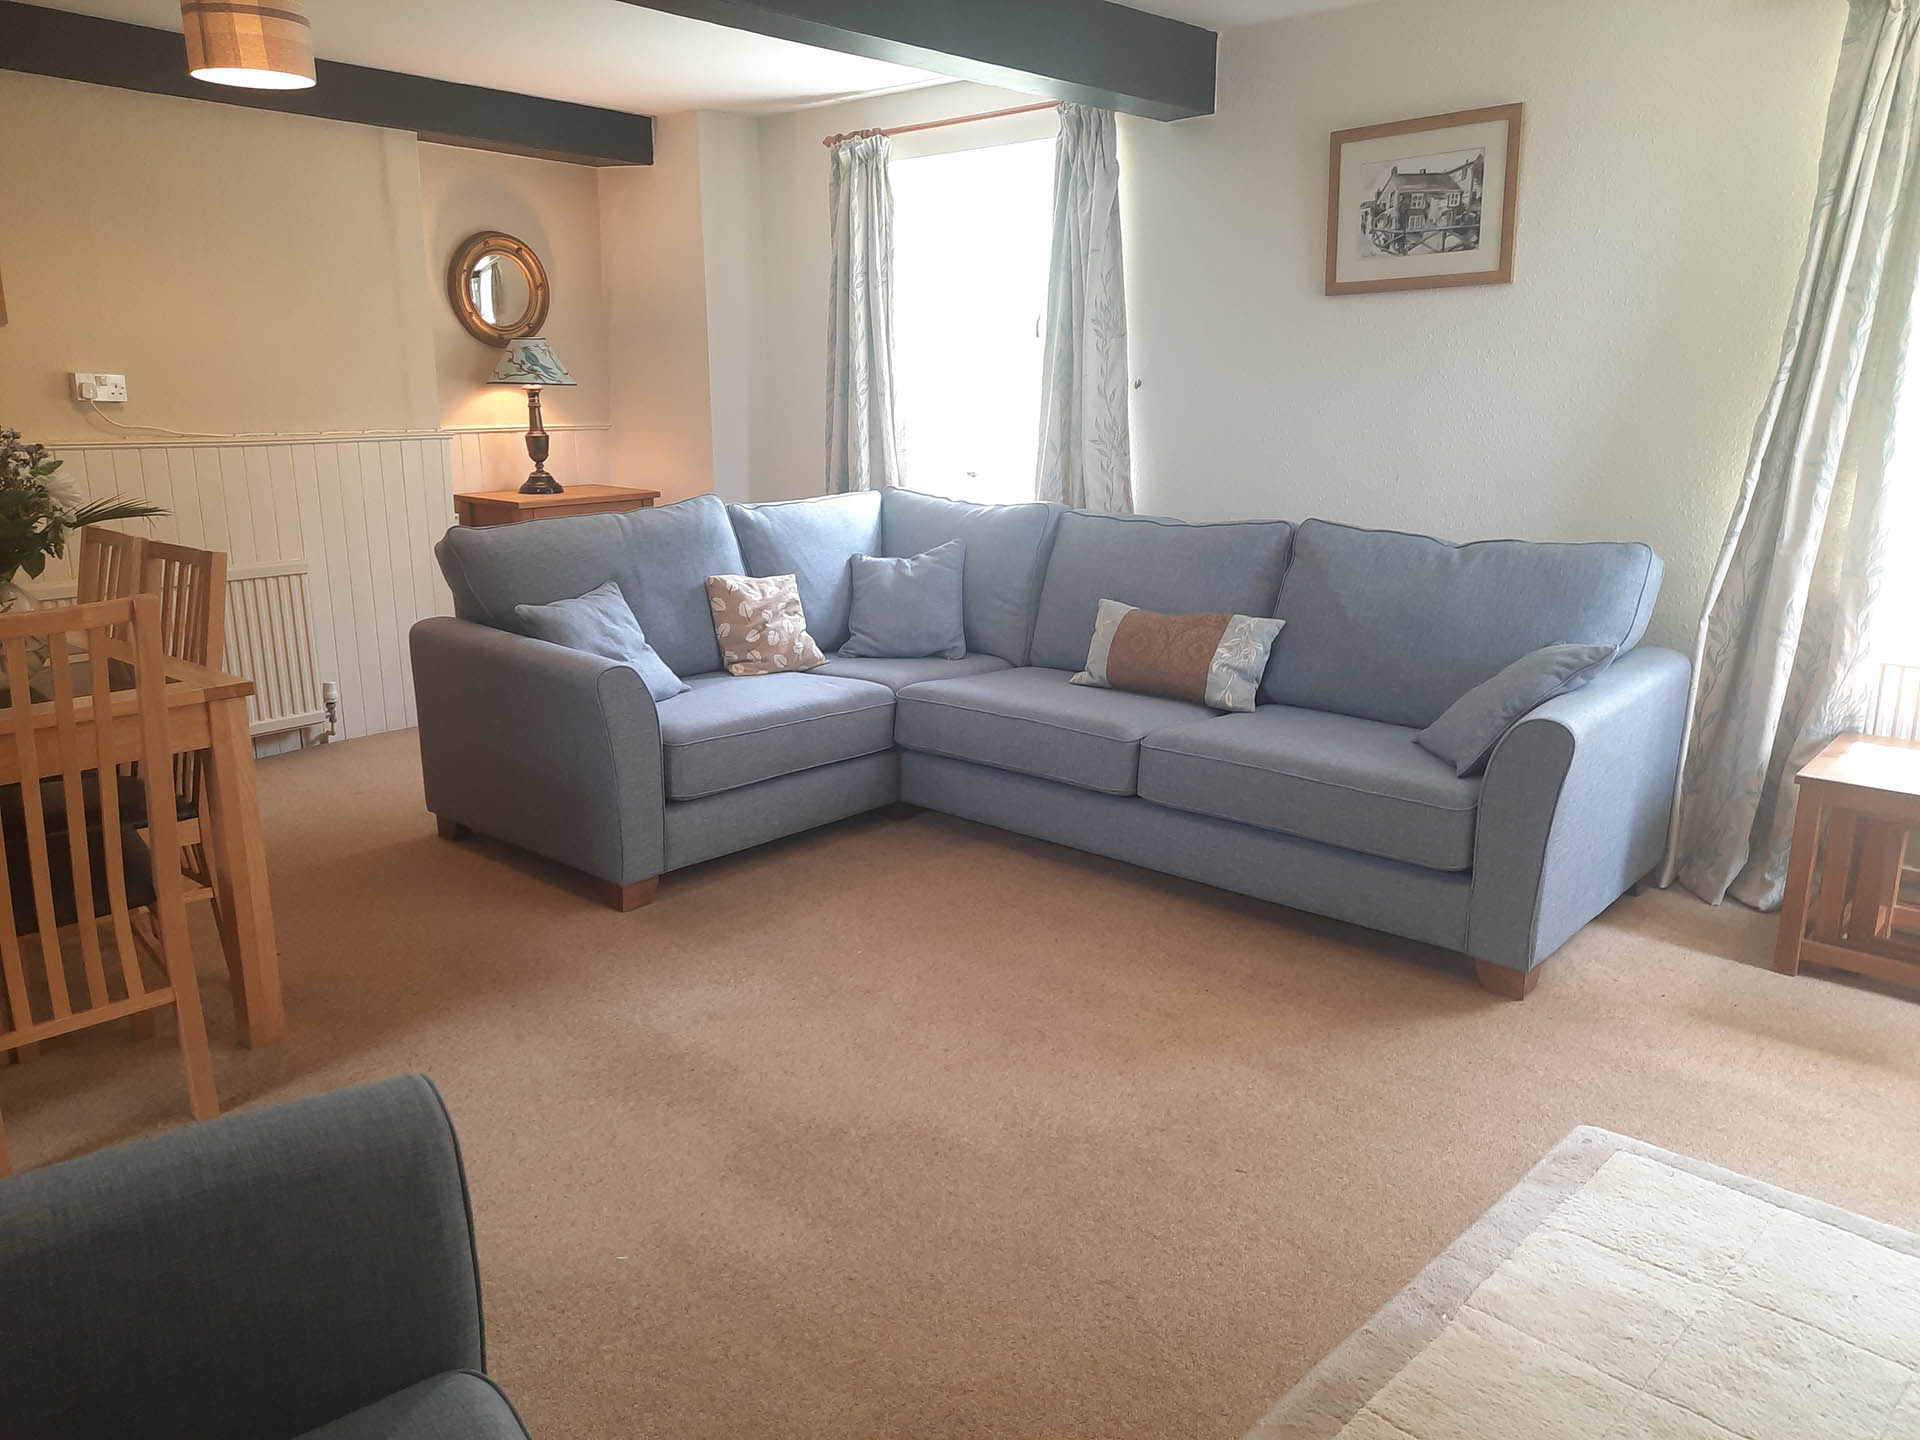 House Cottage Sitting Room Broomhill Manor Holiday Cottages Bude Cornwall